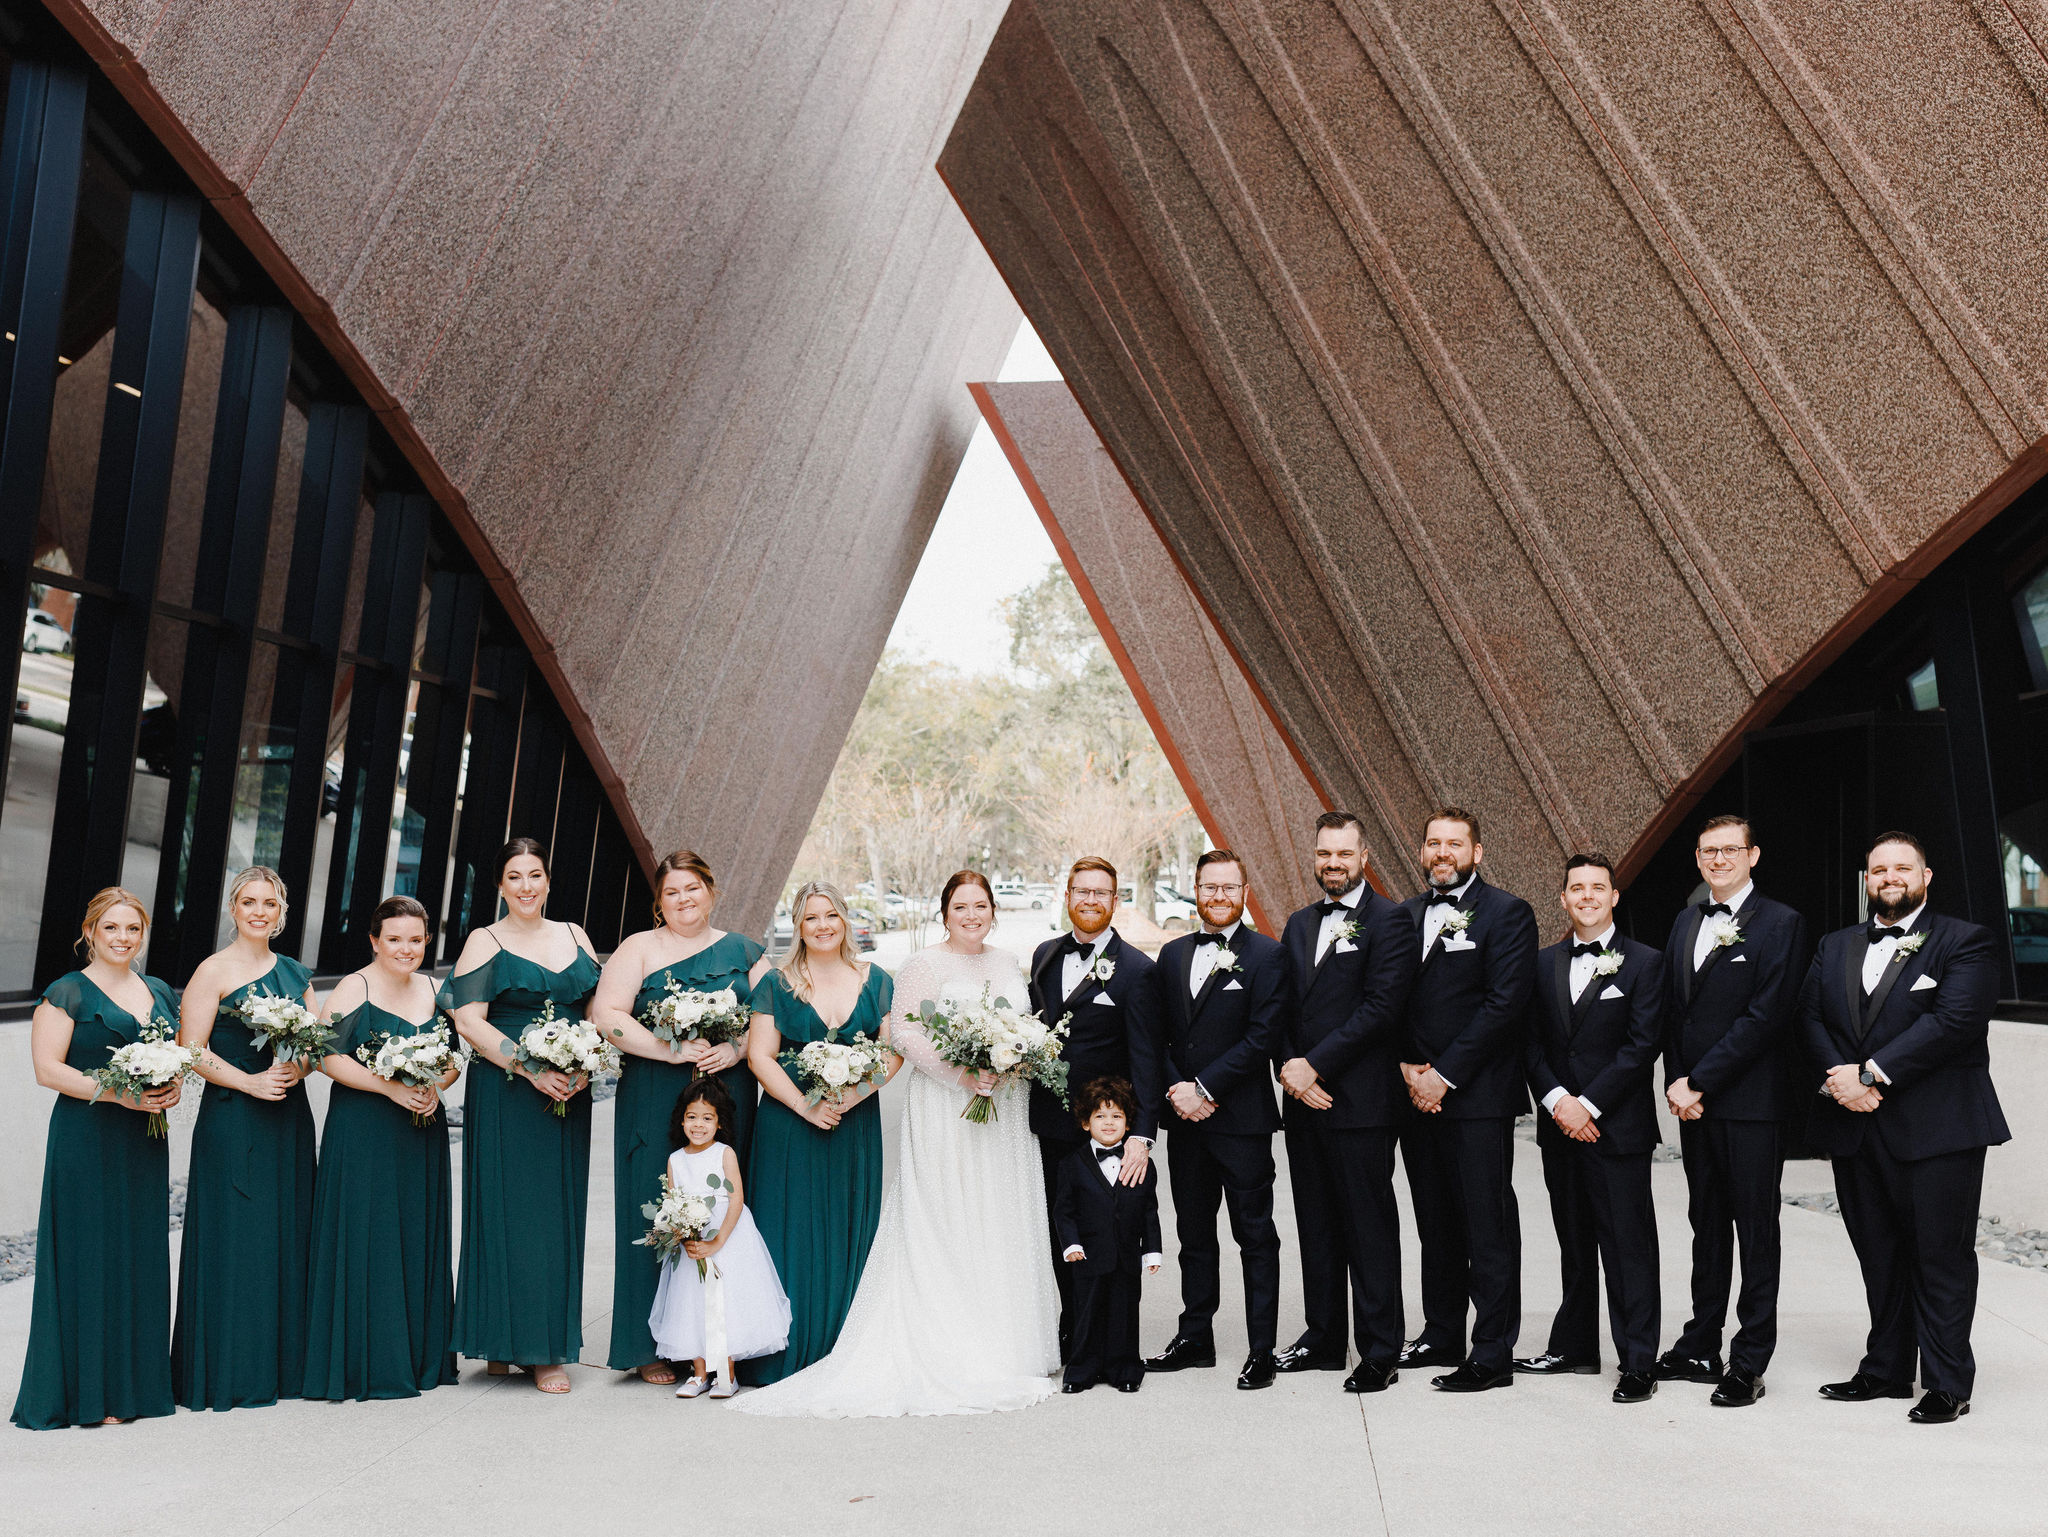 Katie and Bobby with their wedding party at the Winter Park Events Center